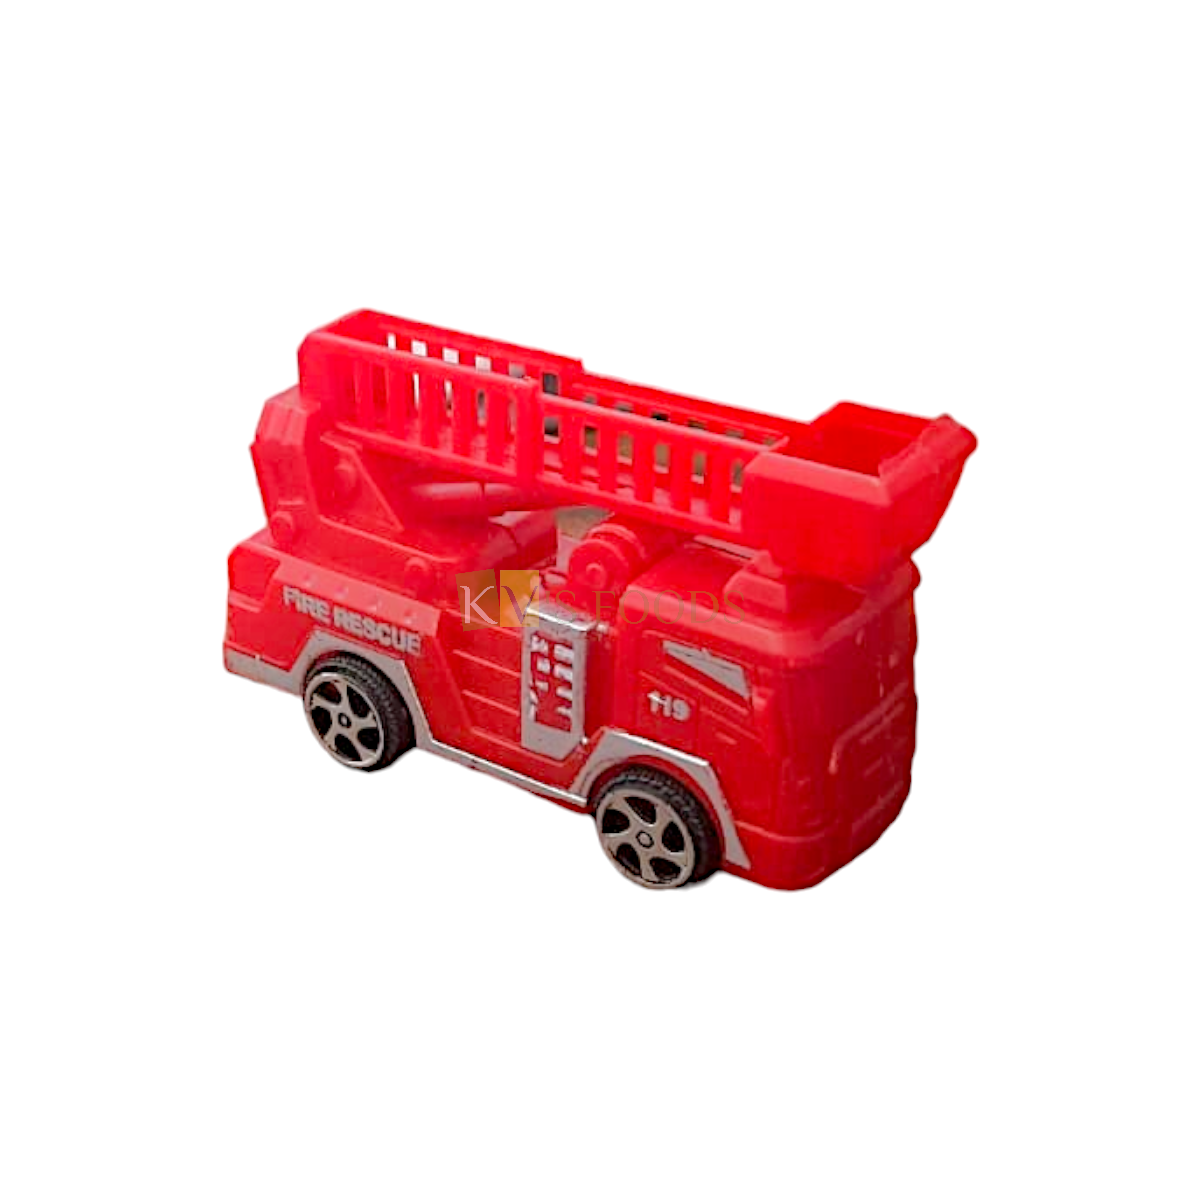 1PC Red Pull Back Fire Truck Cake Topper Fire Fighter Fire Engine Fire Rescue Vehicles Fire Brigade, Ladder Truck, Girls Boys Childrens Birthday Play Toys, Kids Room Decor Gifts, DIY Cake Decorations